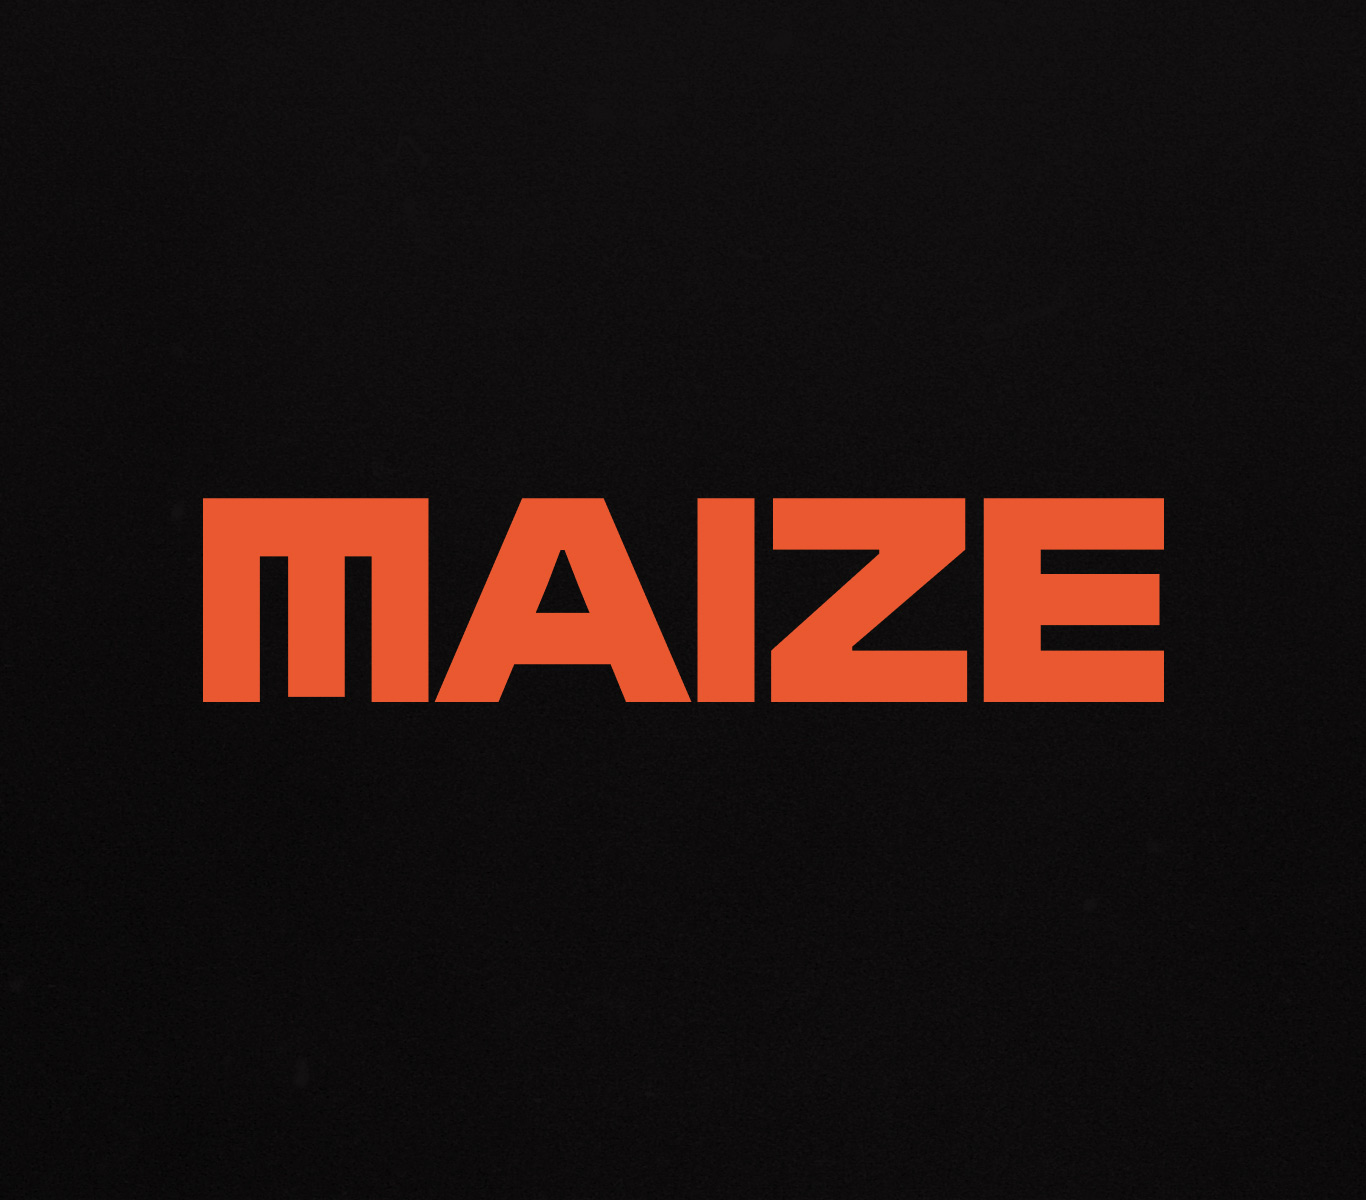 Black textured background with the words Maize in red